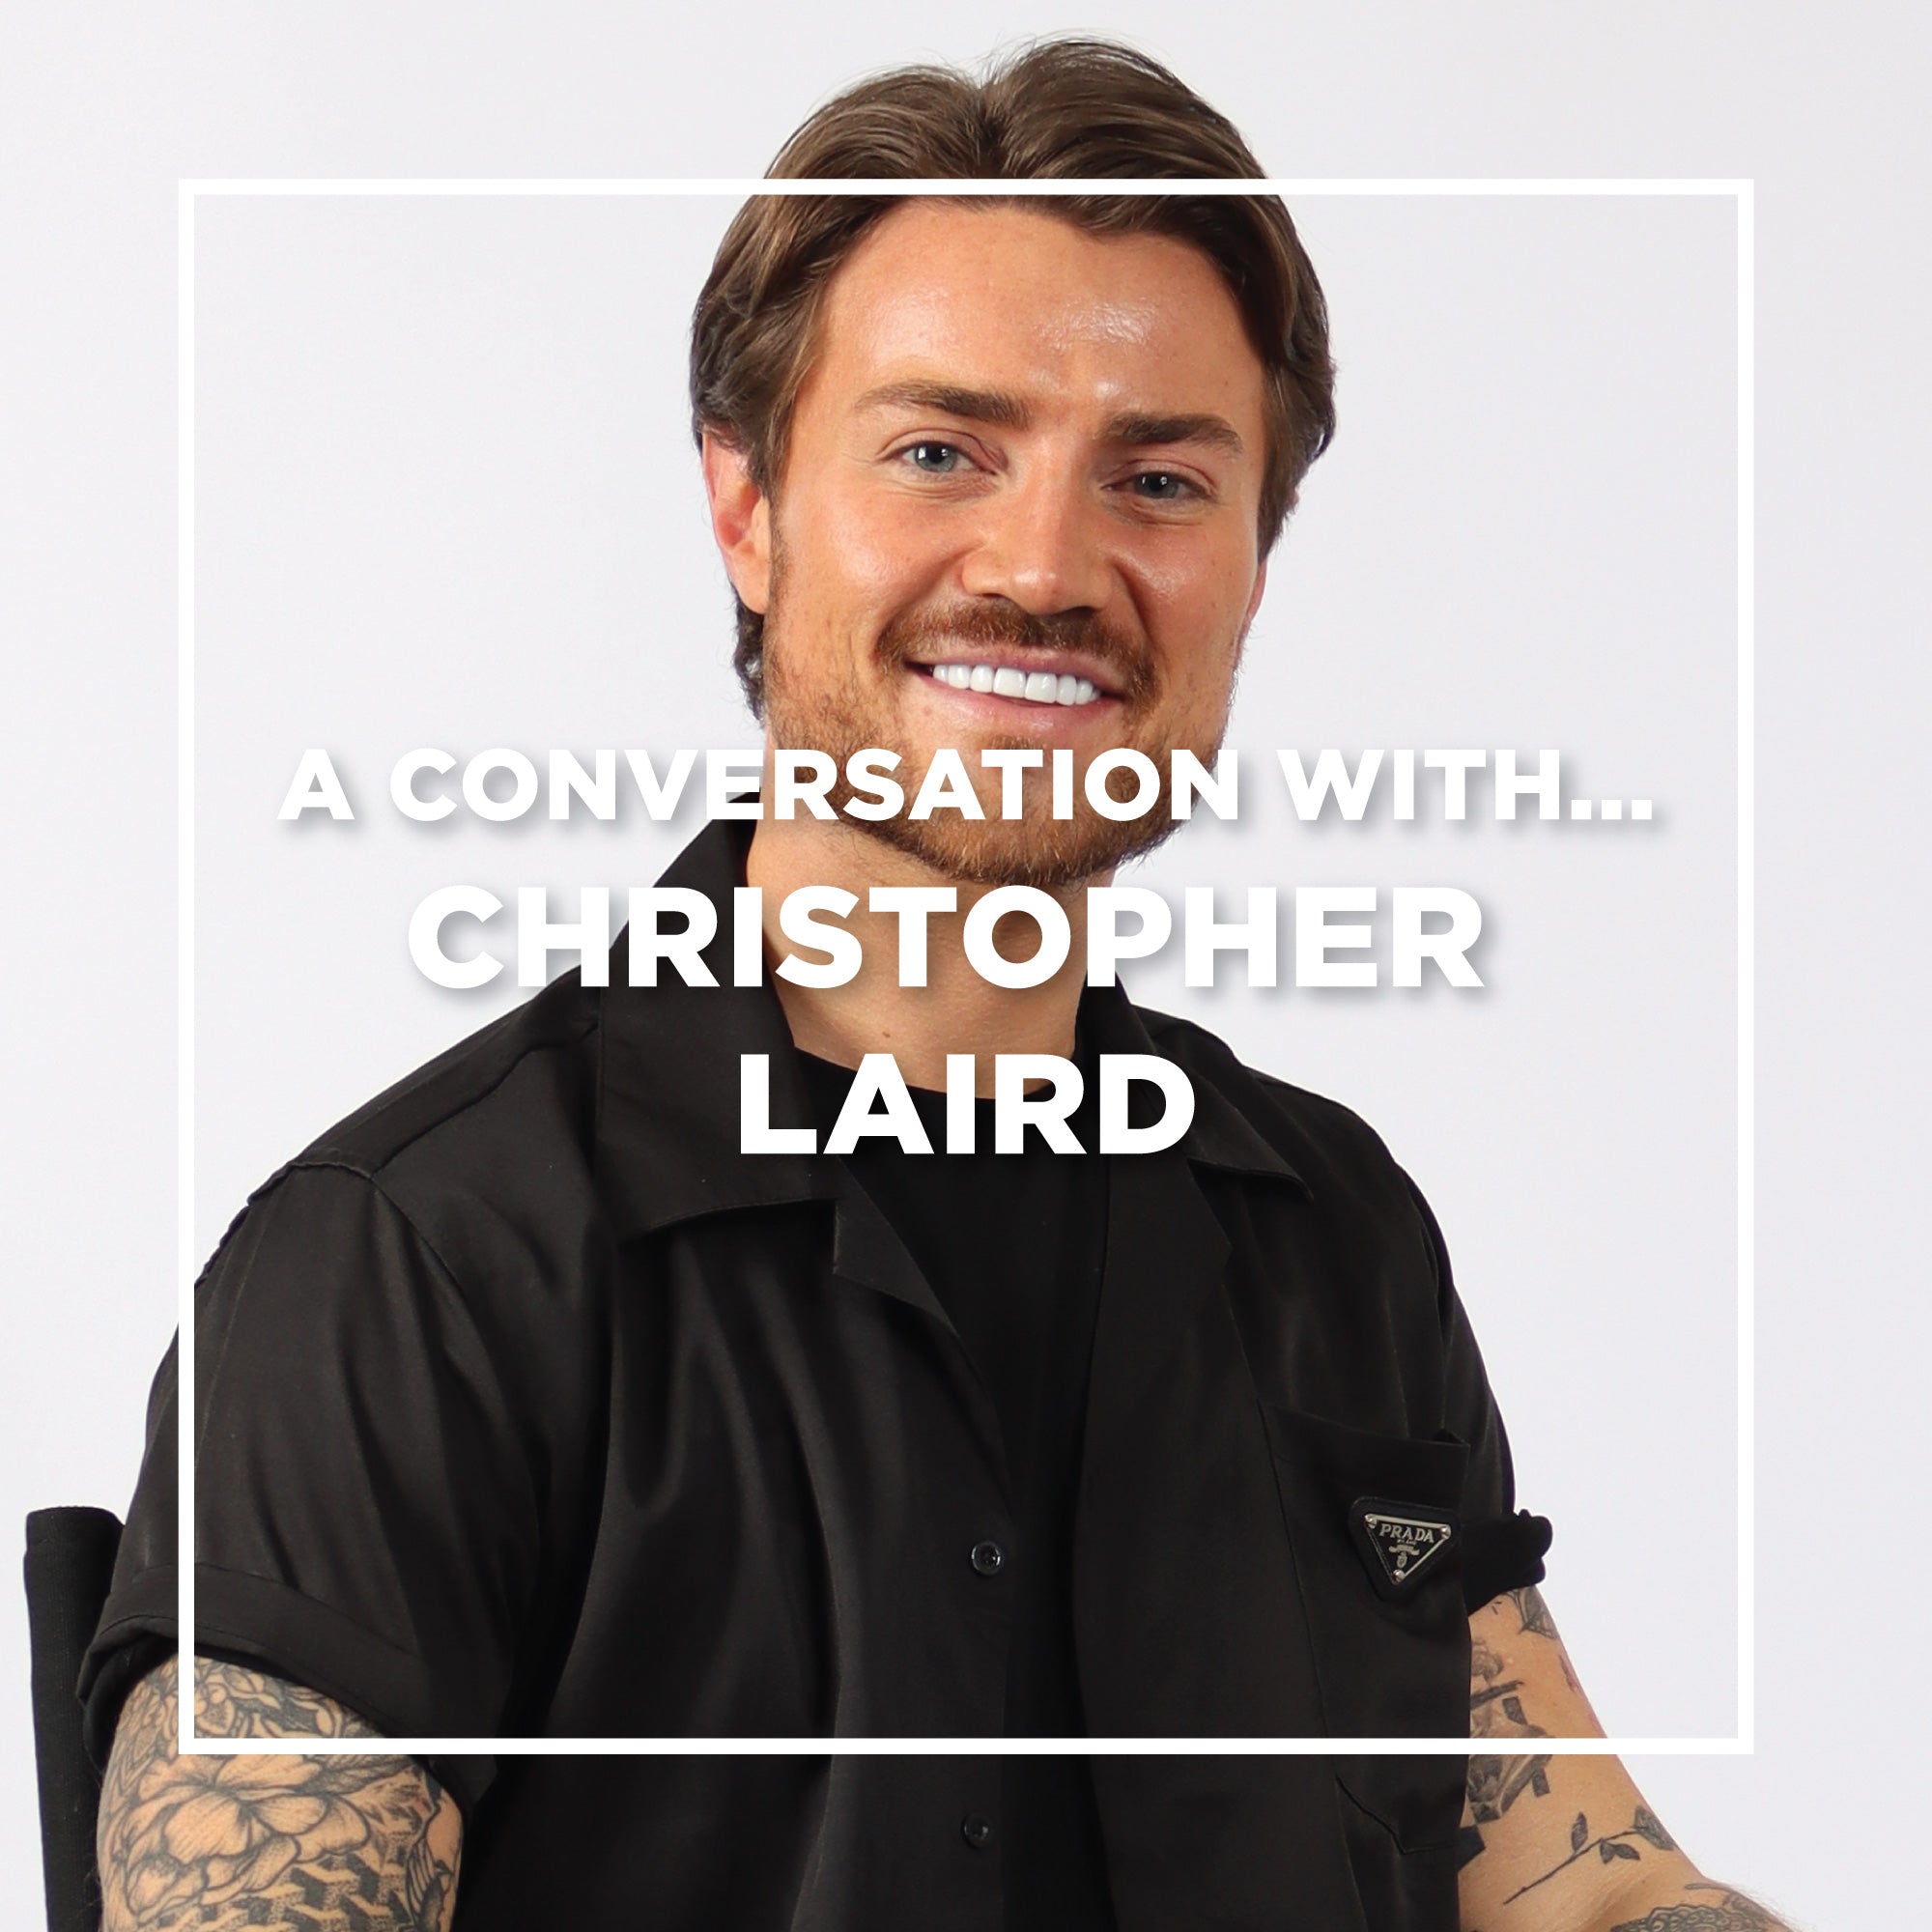 A Conversation With... Christopher Laird